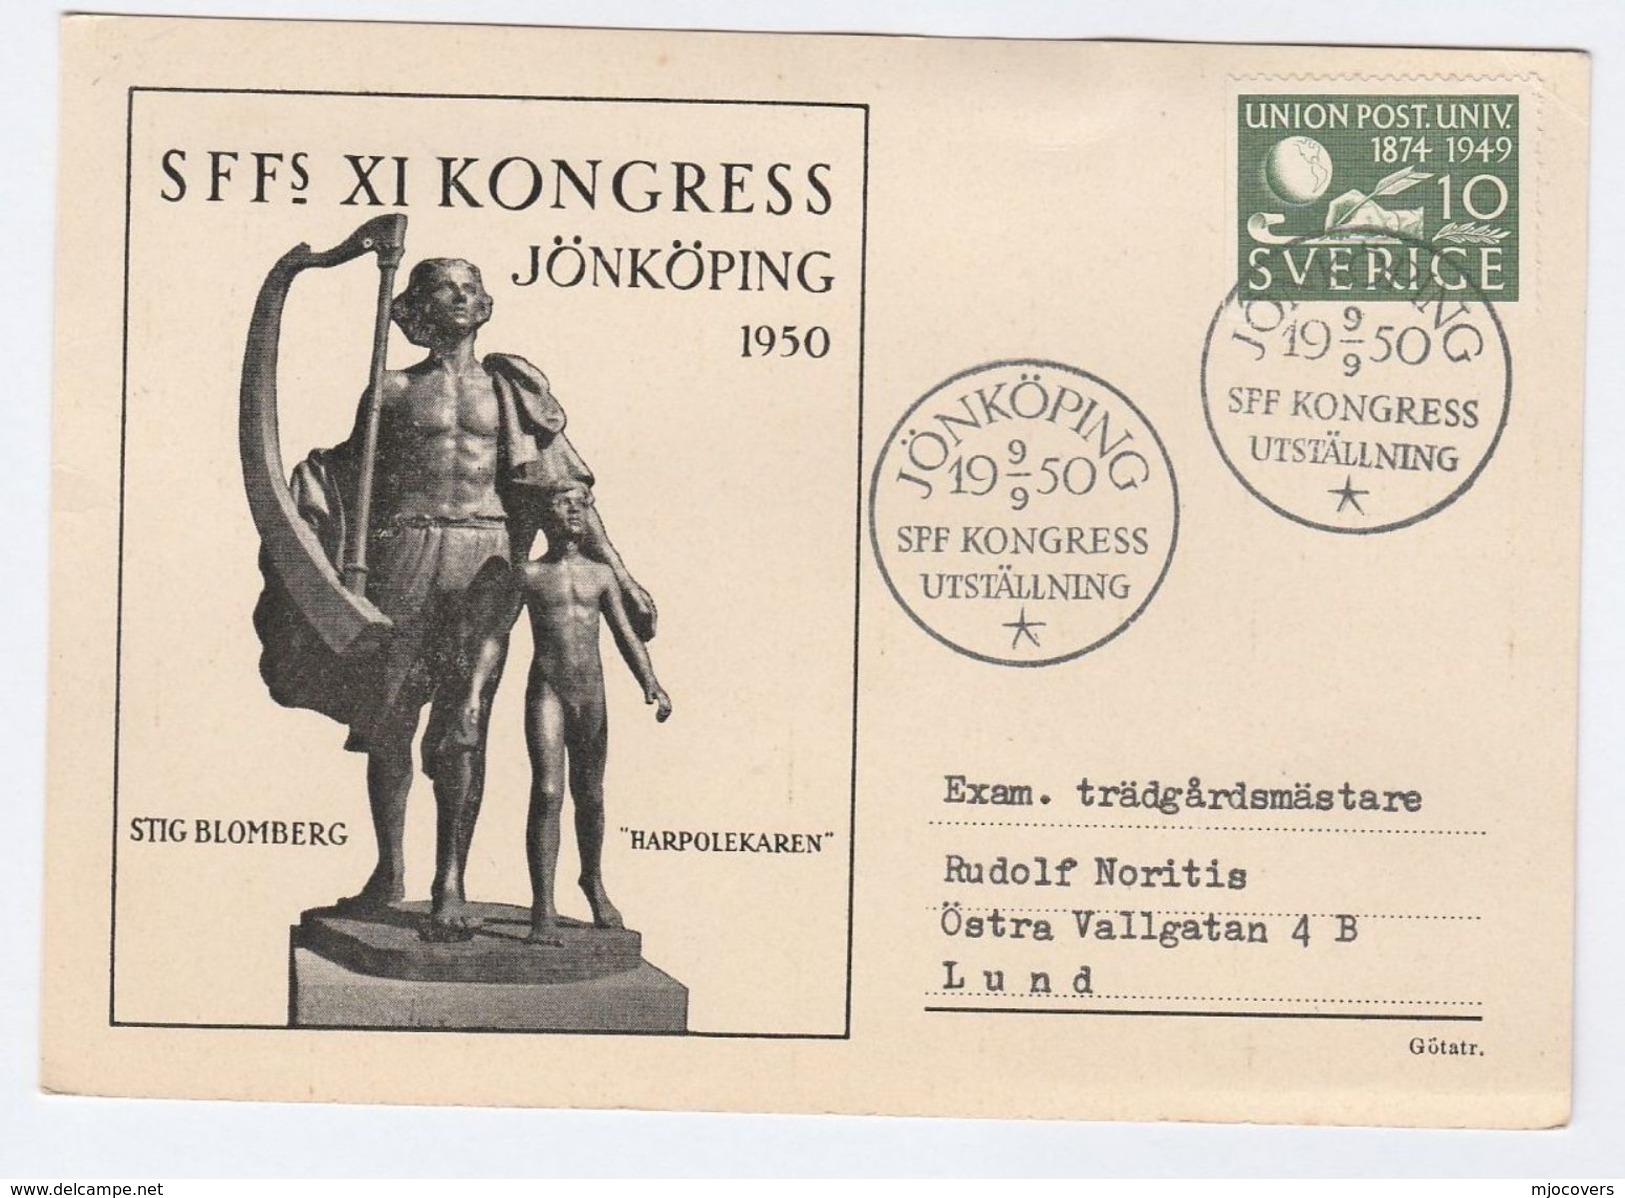 1950 SWEDEN SSFs CONGRESS Jonkoping EVENT COVER (card) UPU Stamps - Covers & Documents